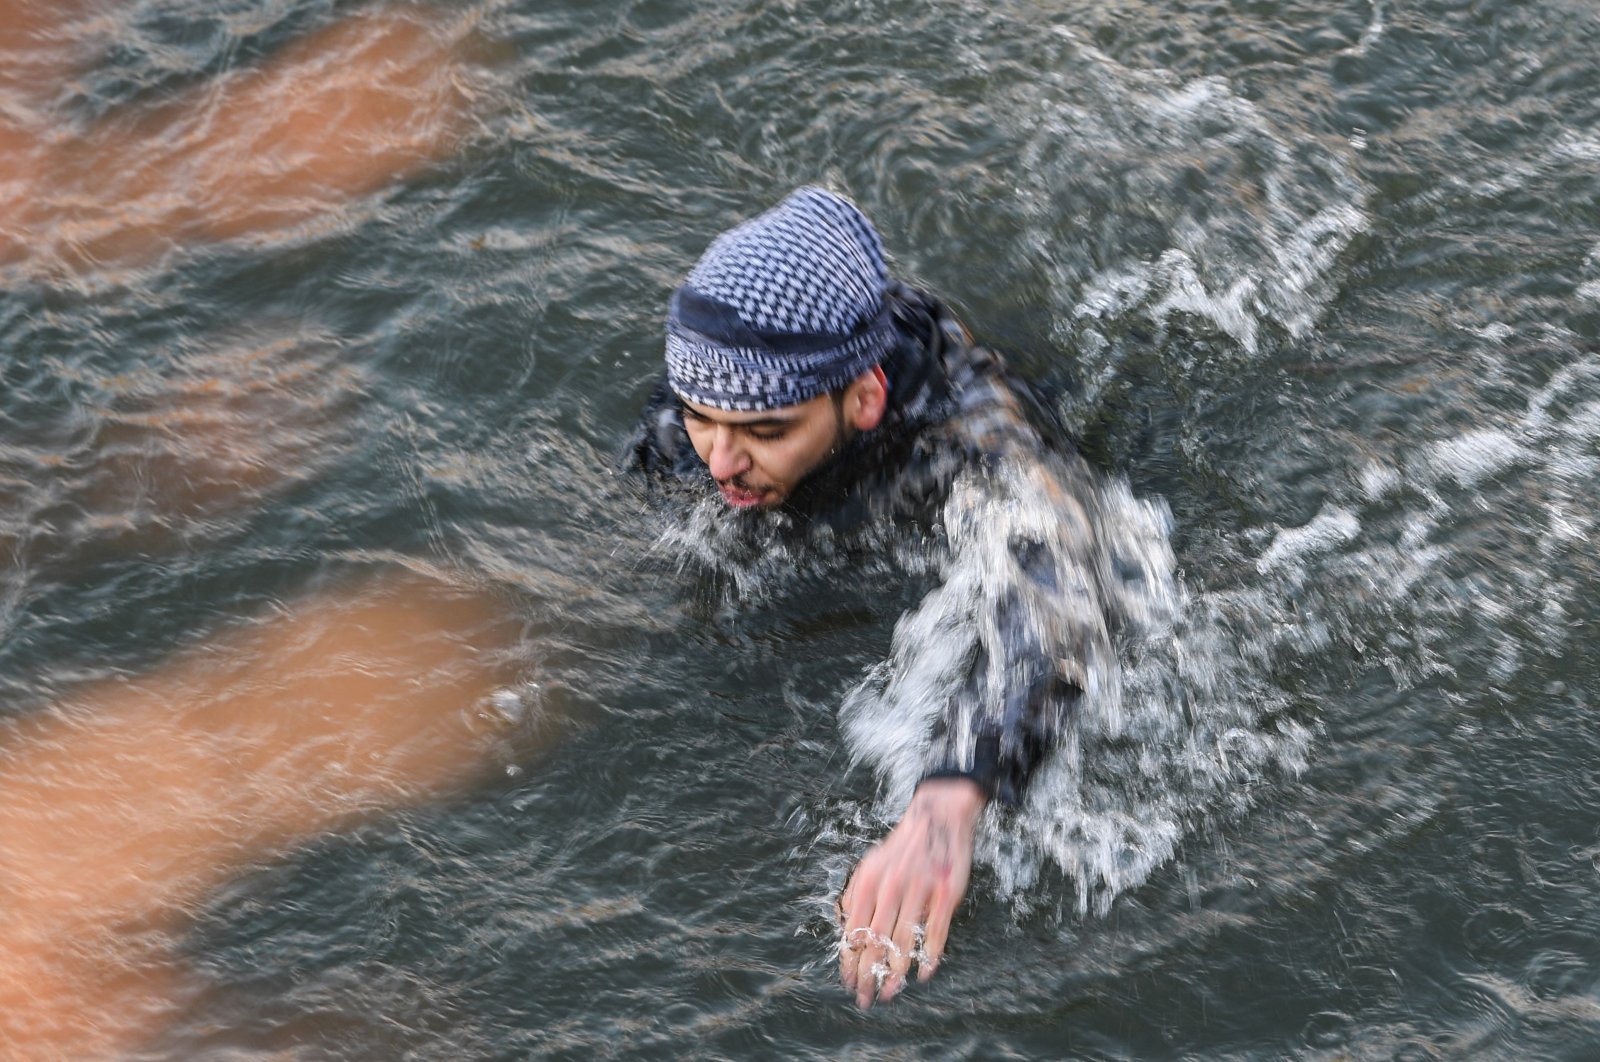 A migrant swims back towards Turkey after trying to enter Greece by crossing the Maritsa river, March 1, 2020. (AFP)